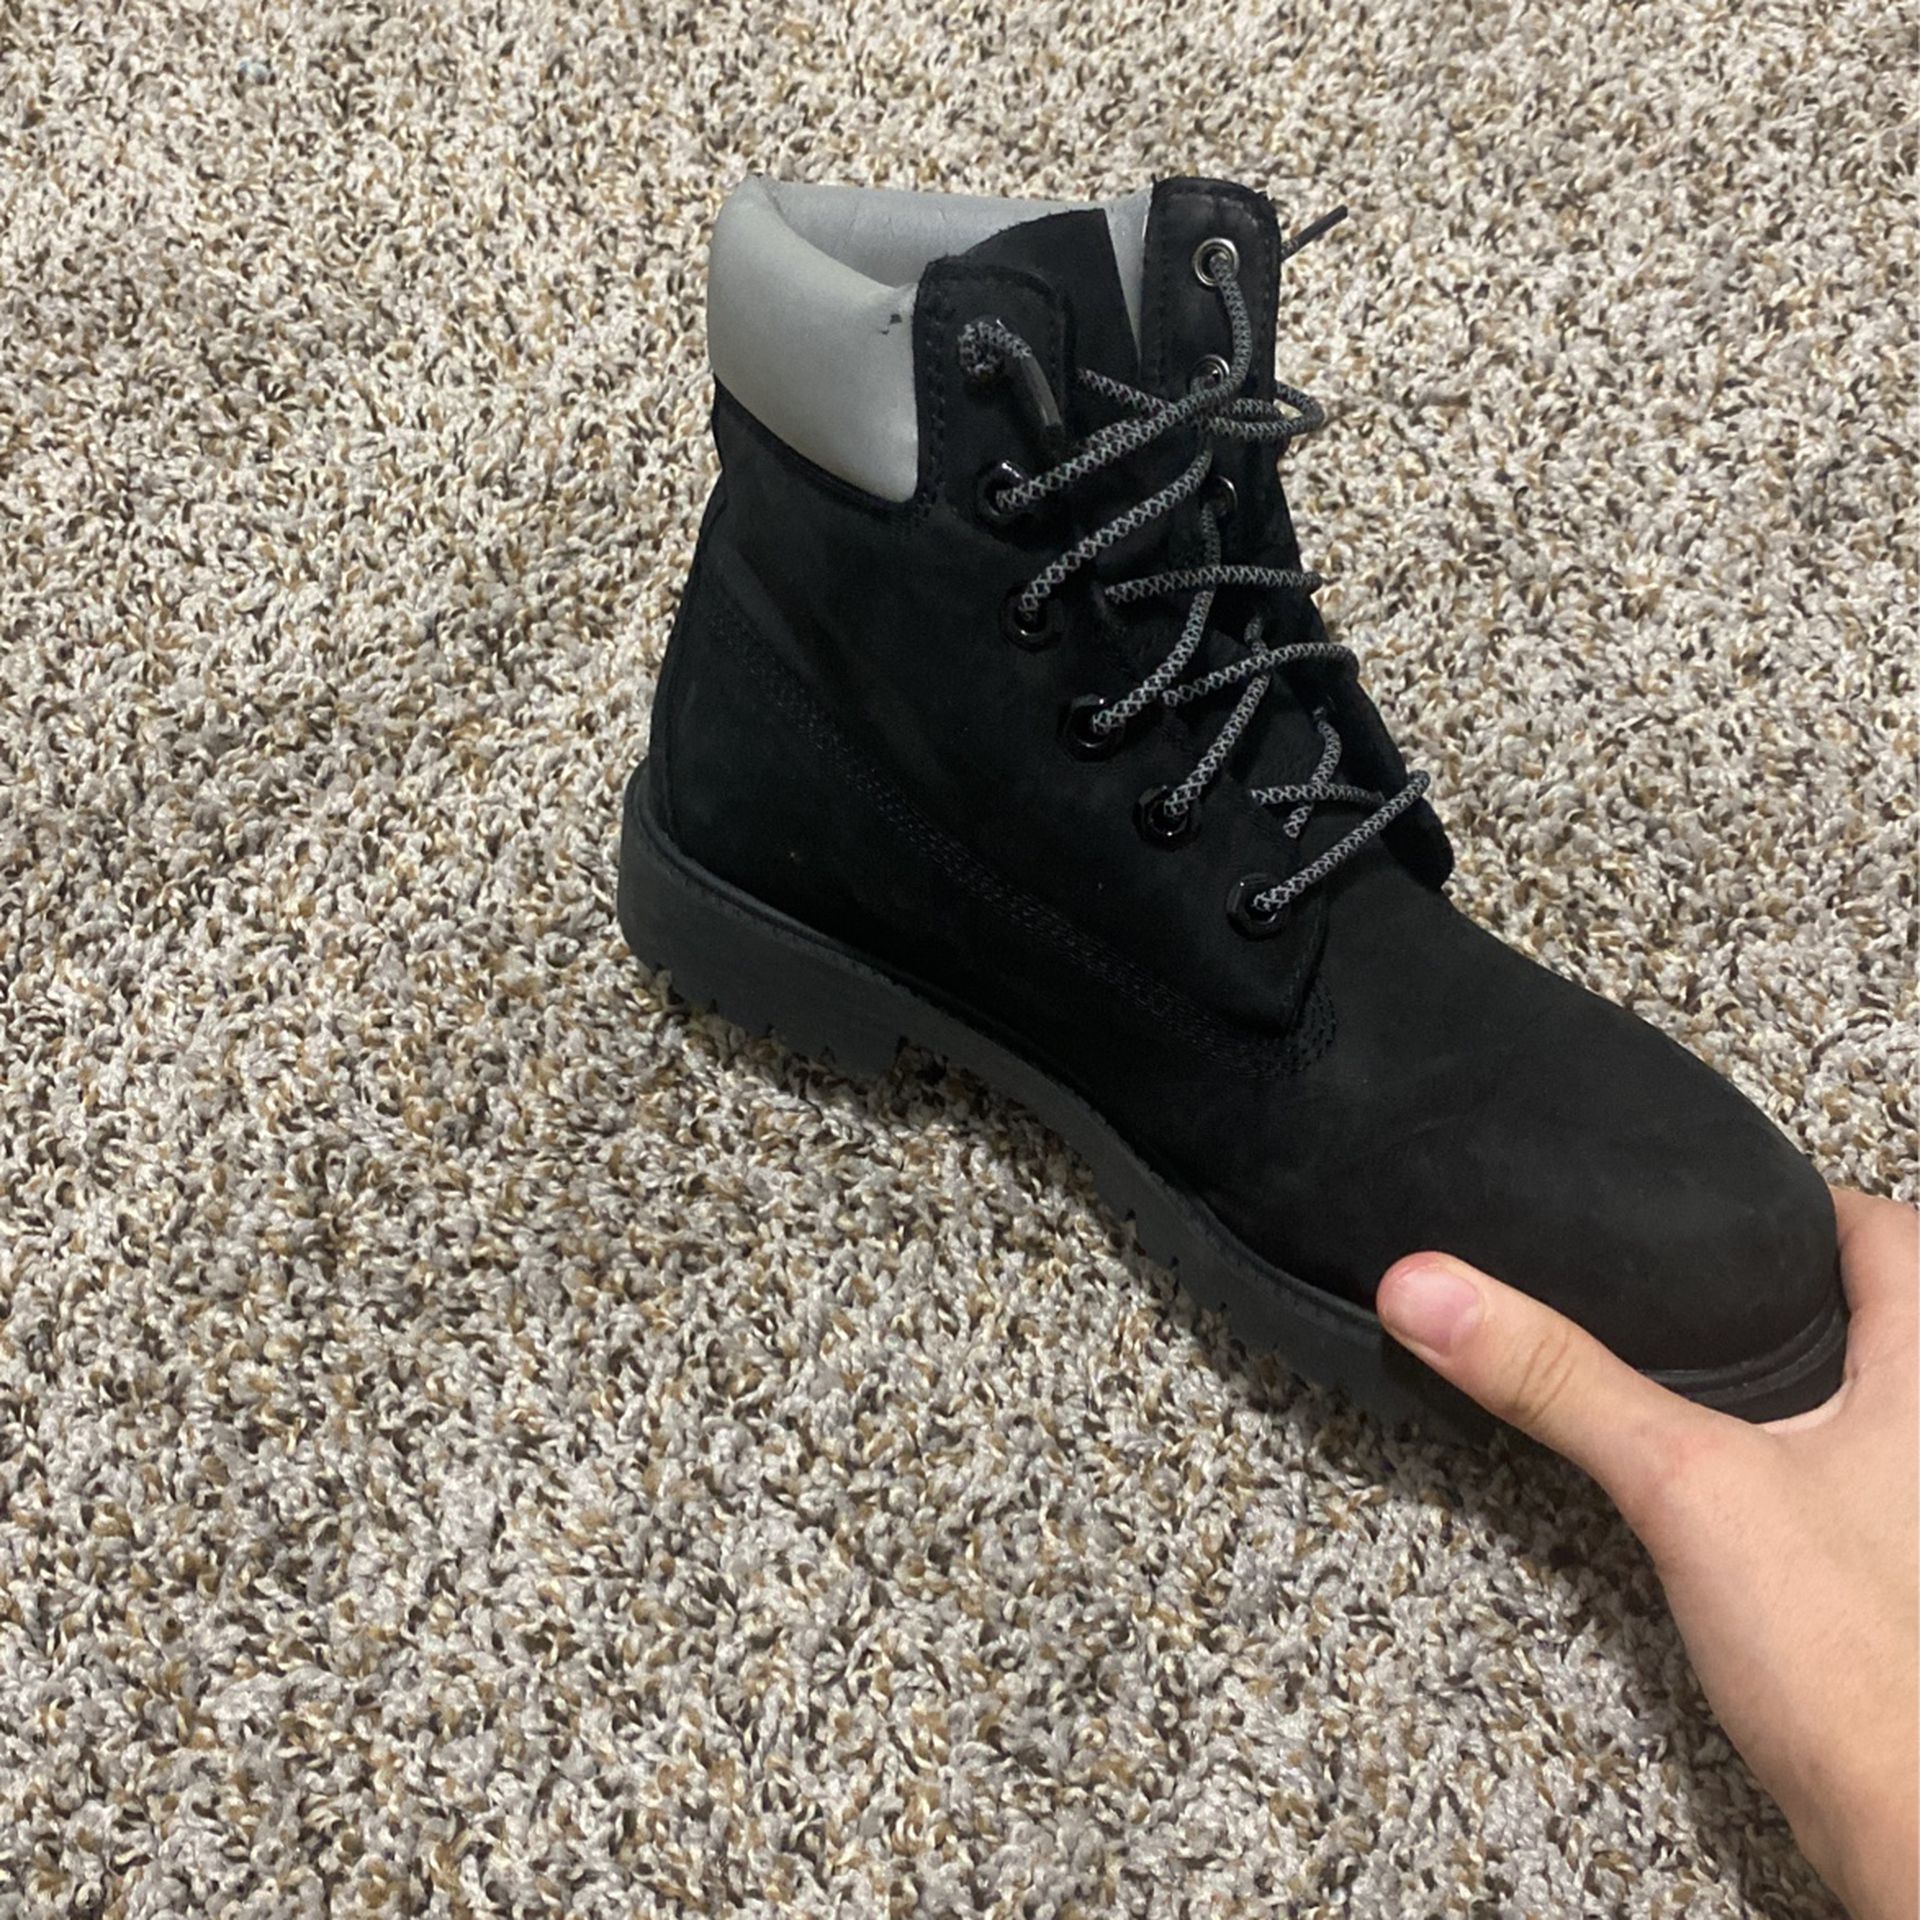 Black Exclusive Tim Boots Reflective  Includes Box